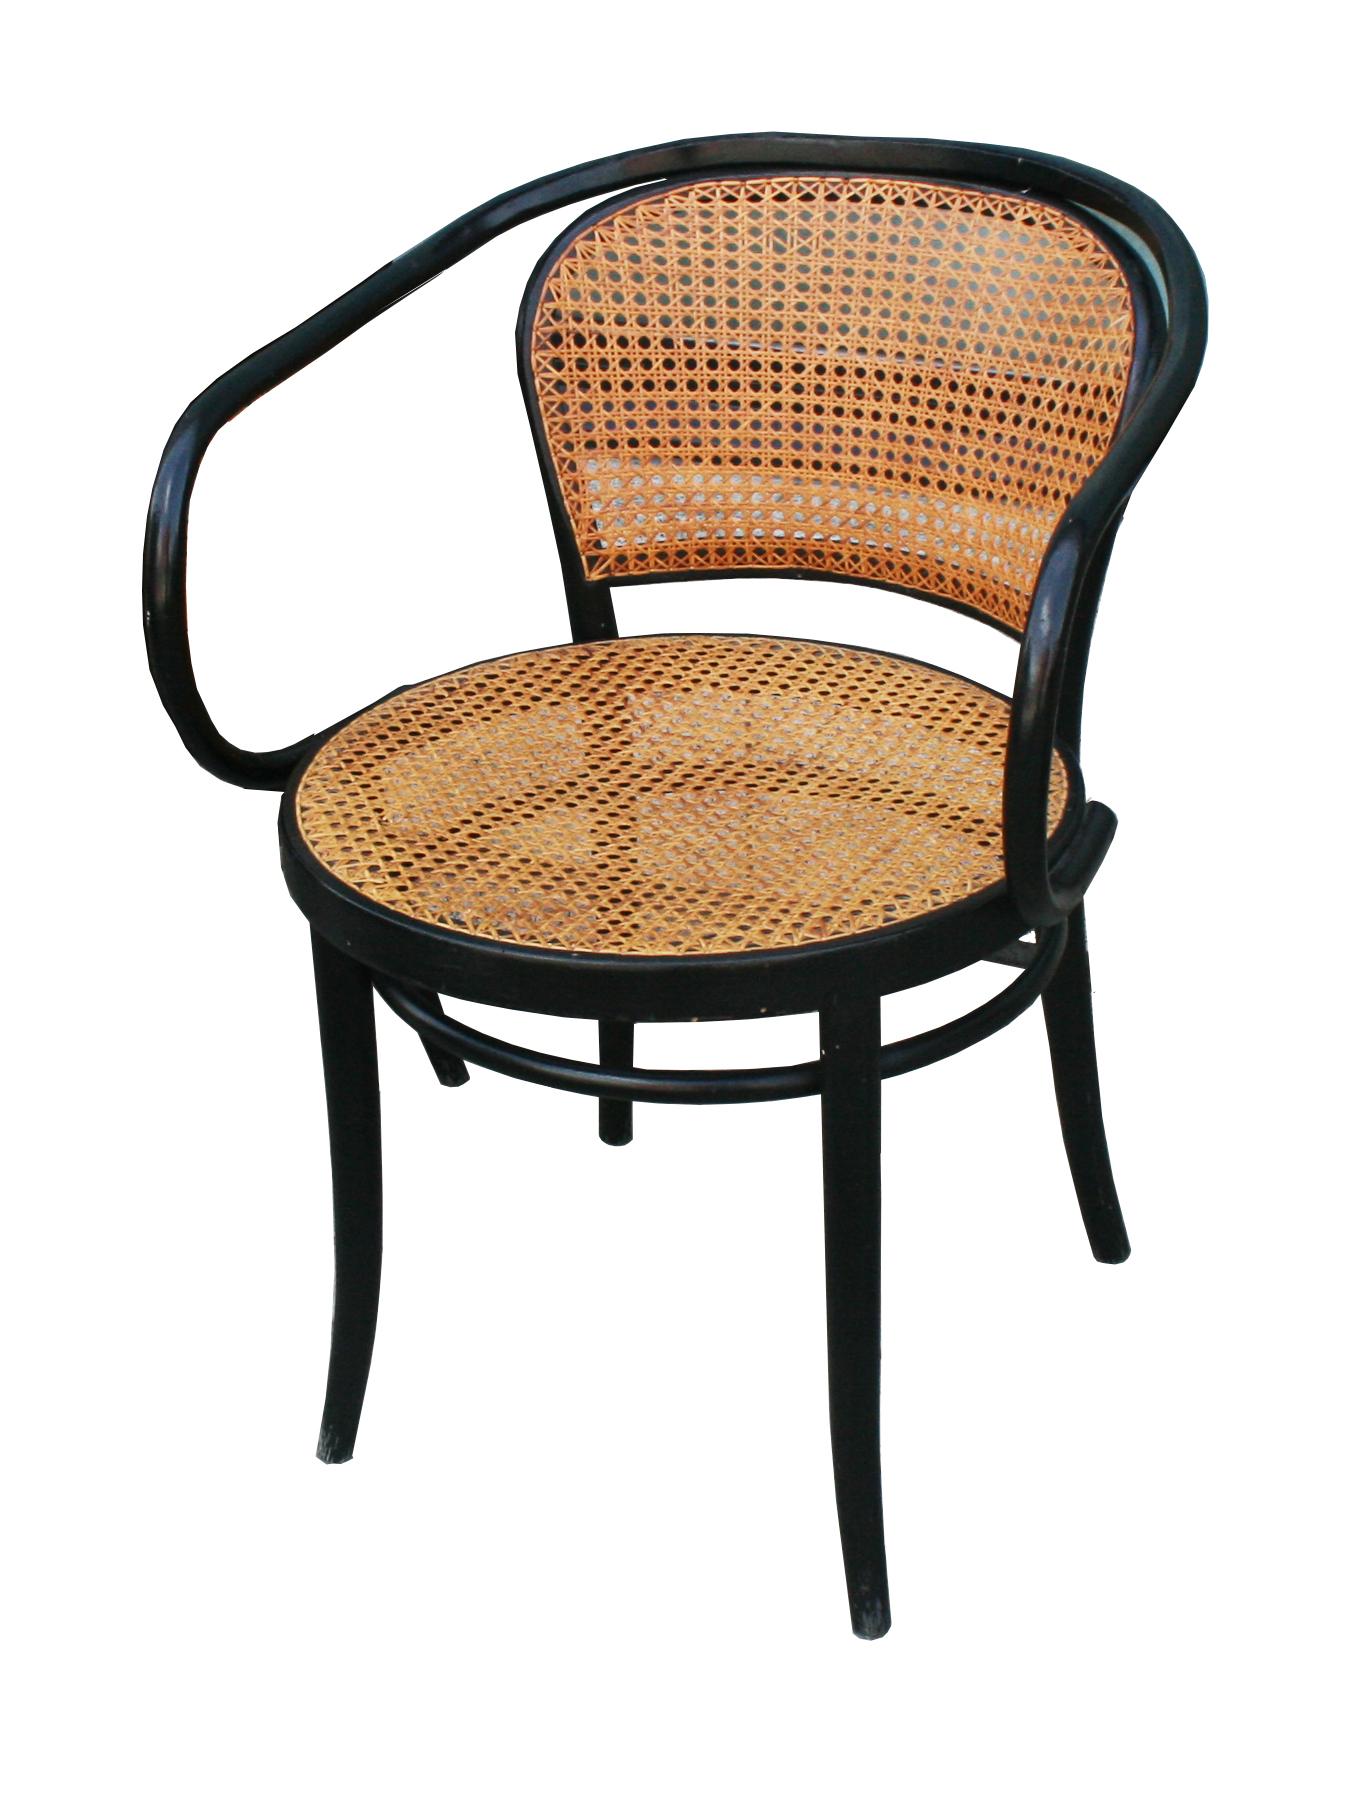 The August Thonet B9 bentwood chair is manufactured in an original Michael Thonet factory in the Czech Republic..Made in the Czech Republic

They are in very very good condition, they are hardly used, ready to be used .Original condition, without